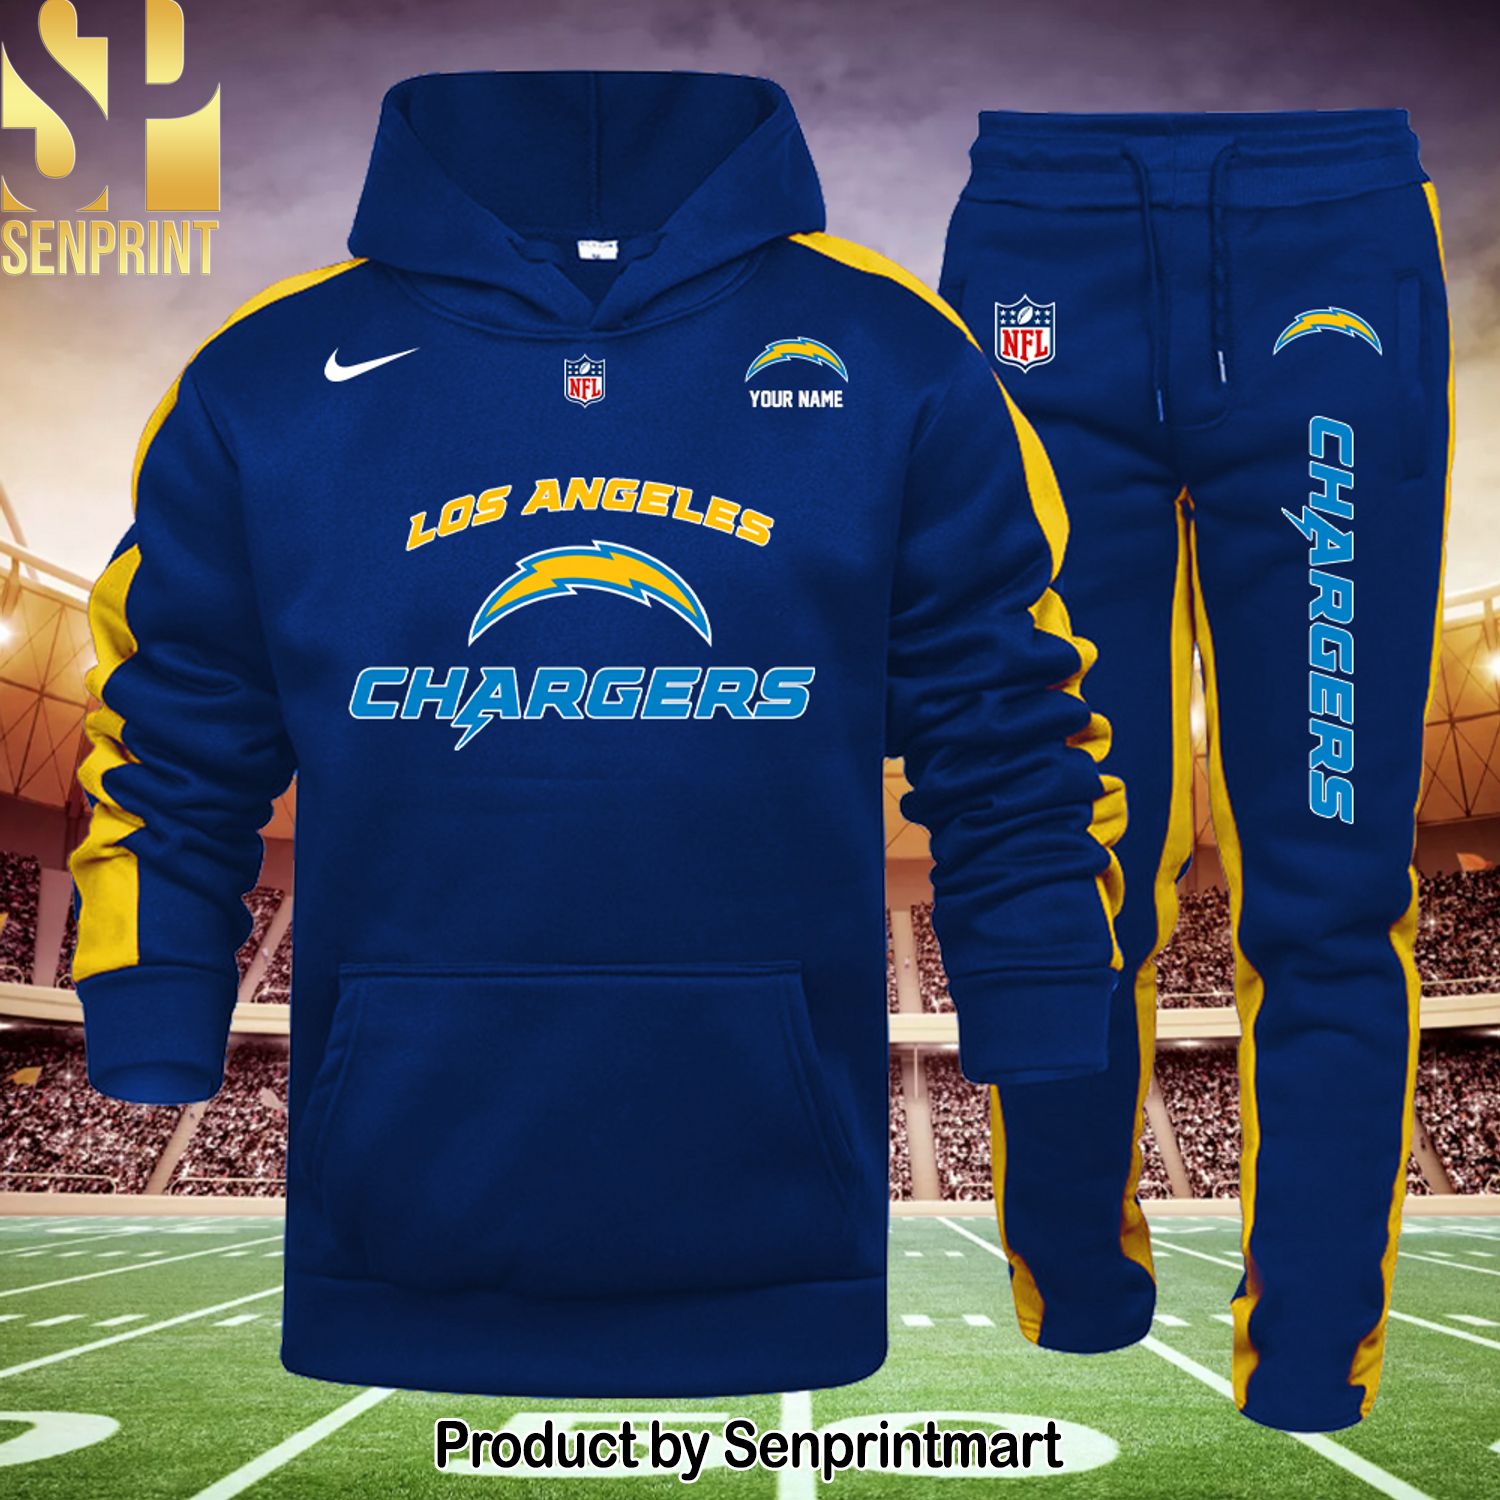 Los Angeles Chargers Hot Version All Over Printed Shirt and Pants